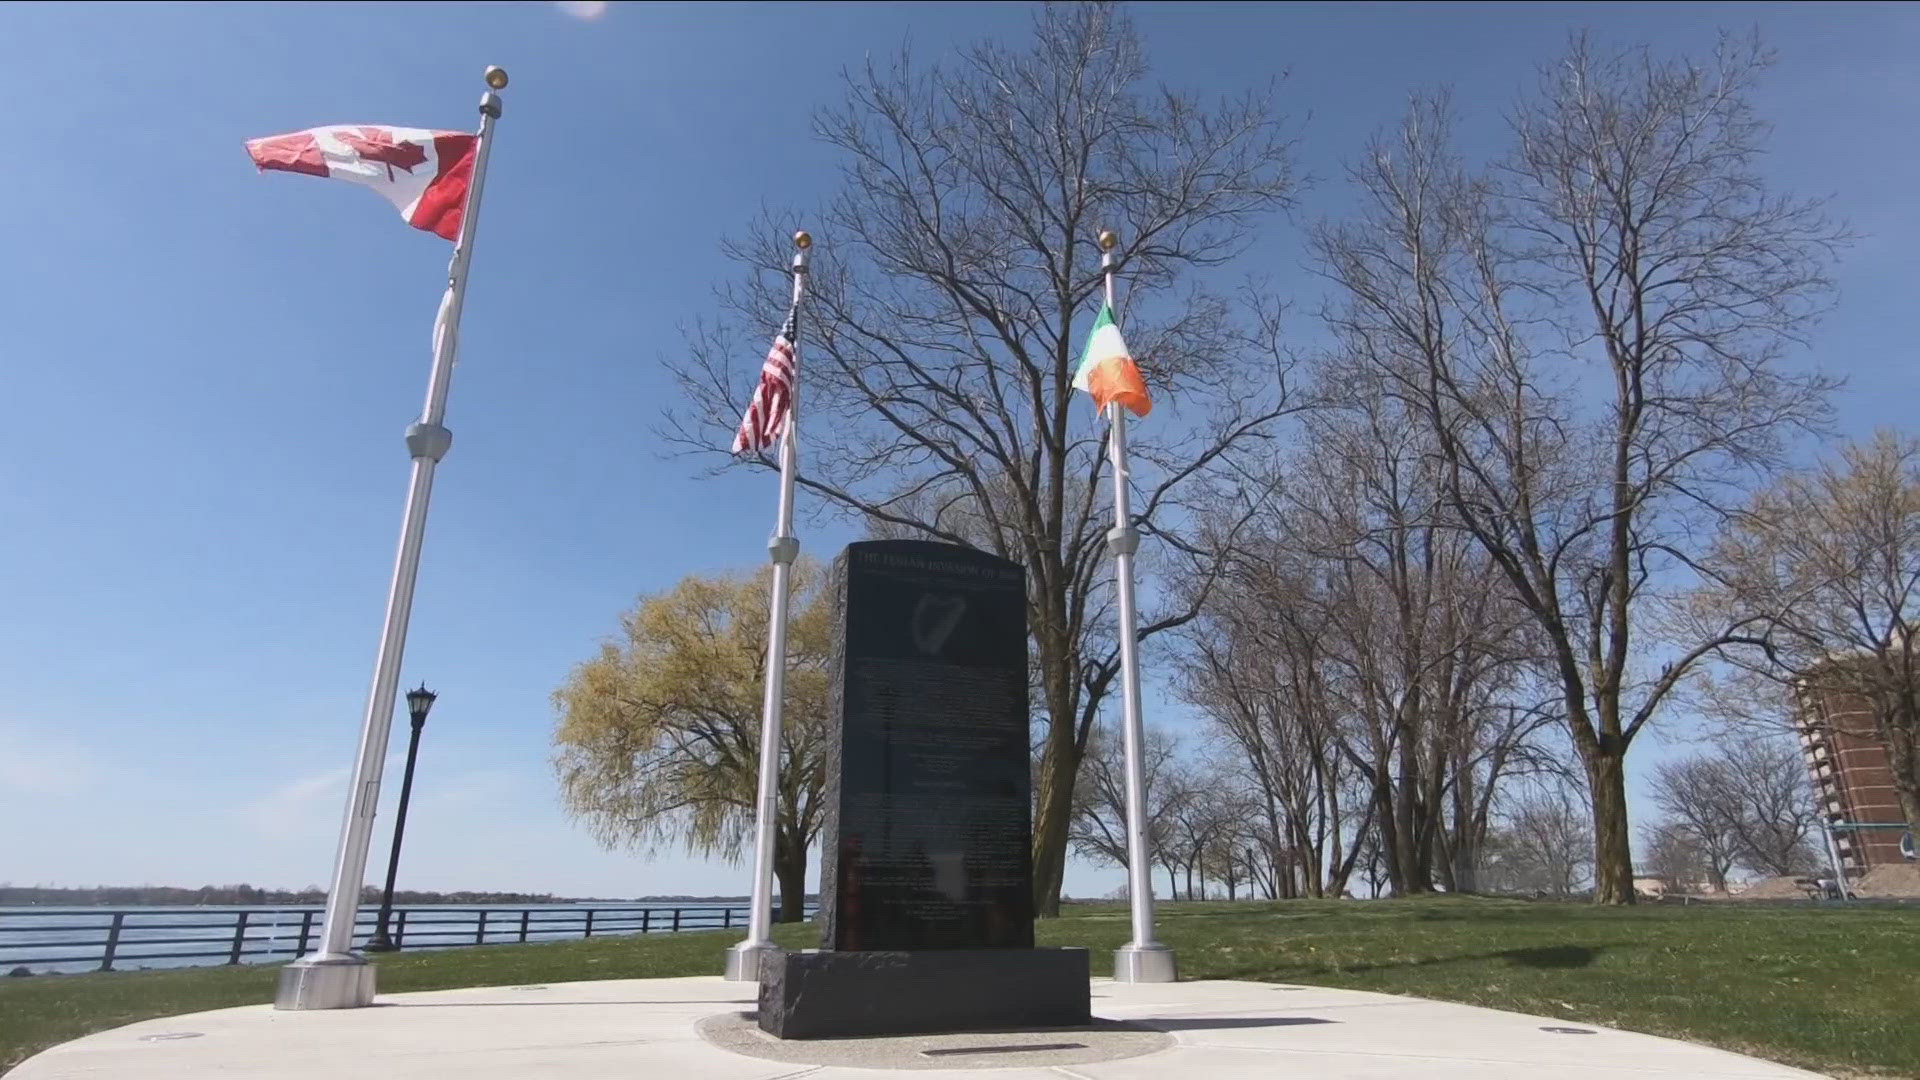 The project serves as a tribute to the region's Irish-American history.